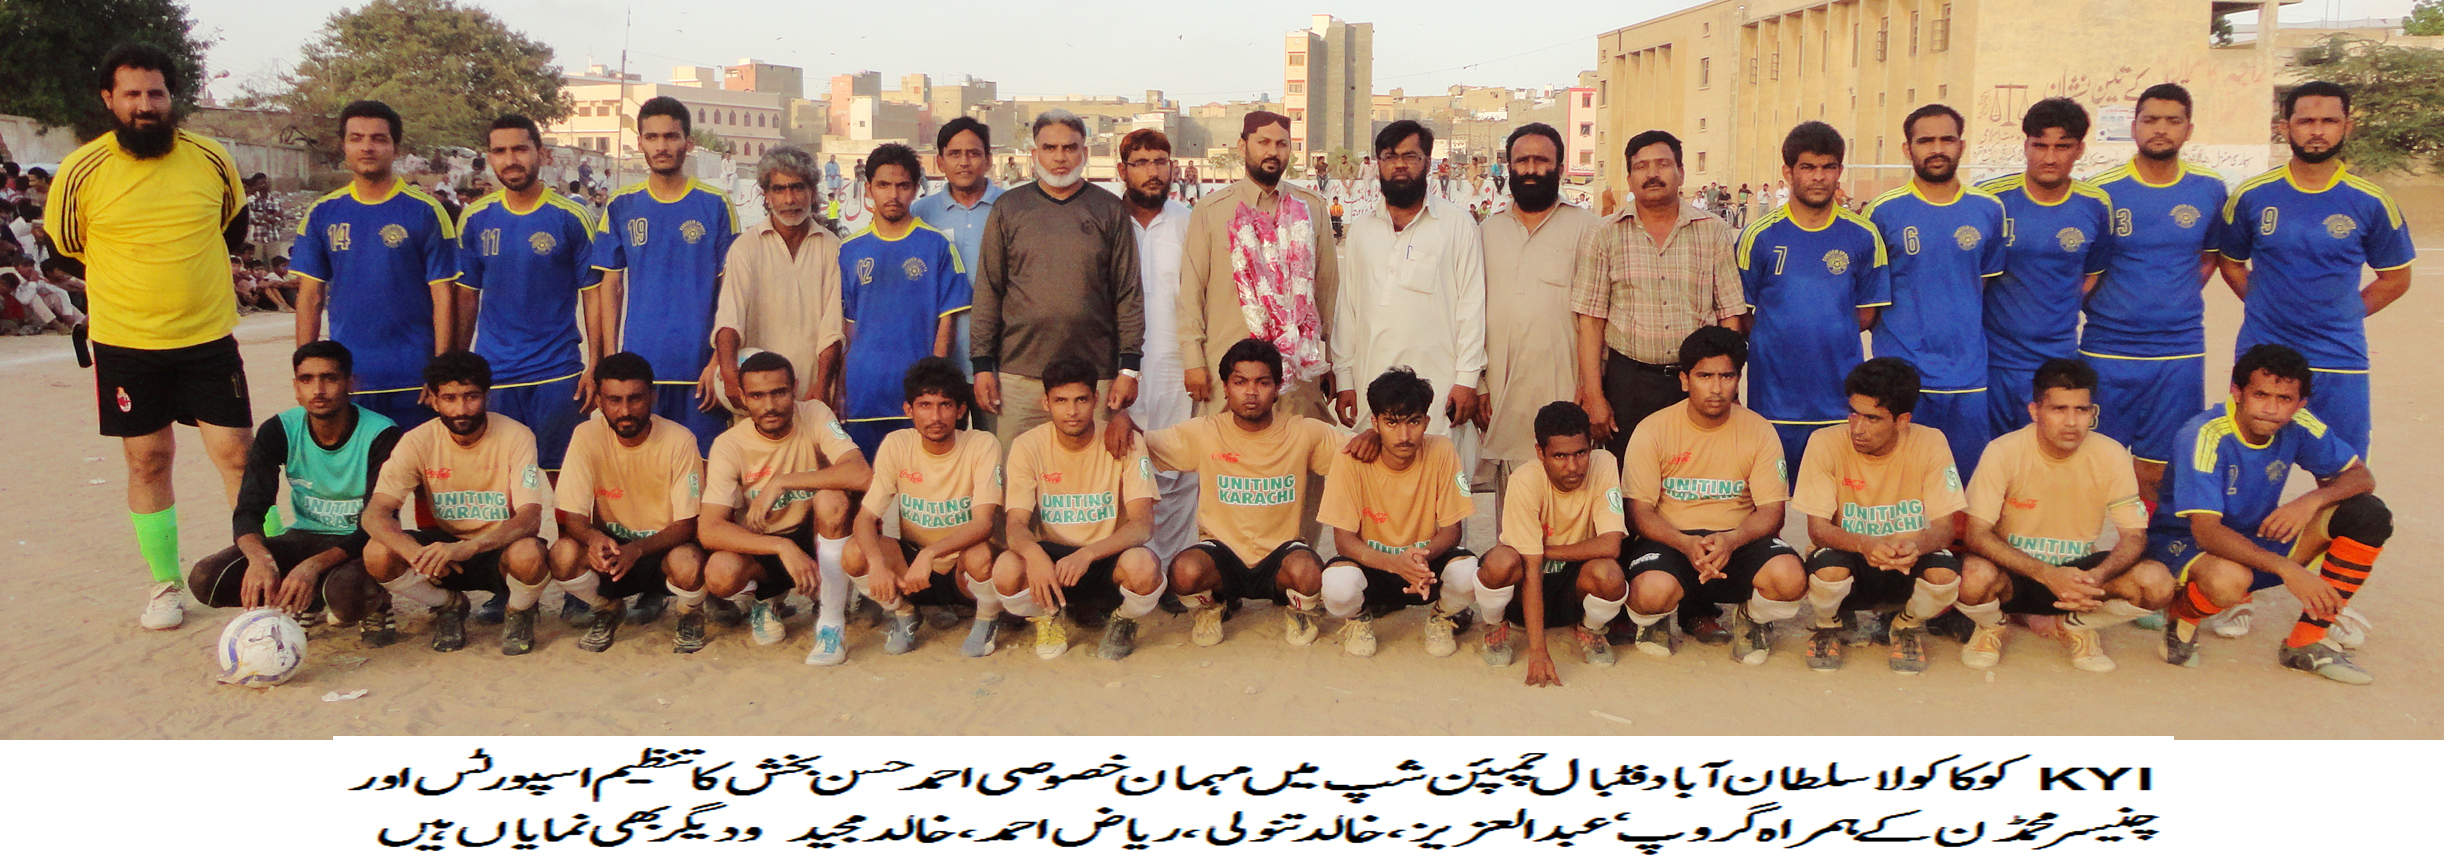 Coca-Cola Sultanabad Championship: Chanesar Blue and Tanzeem Sports to face-off in final